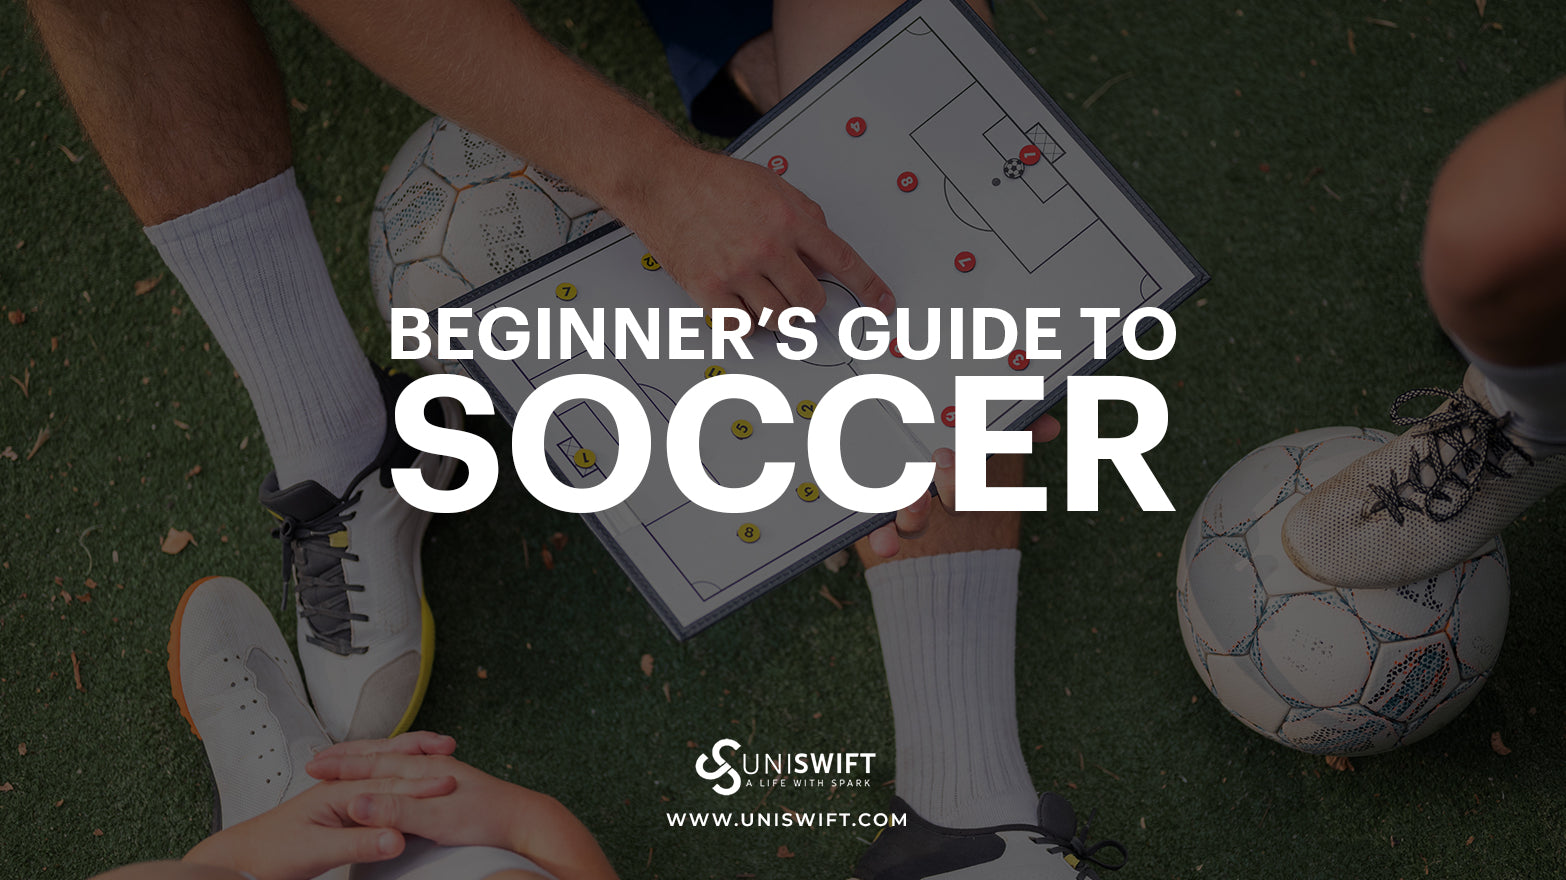 Play like a Pro: A Beginner’s Guide to Soccer